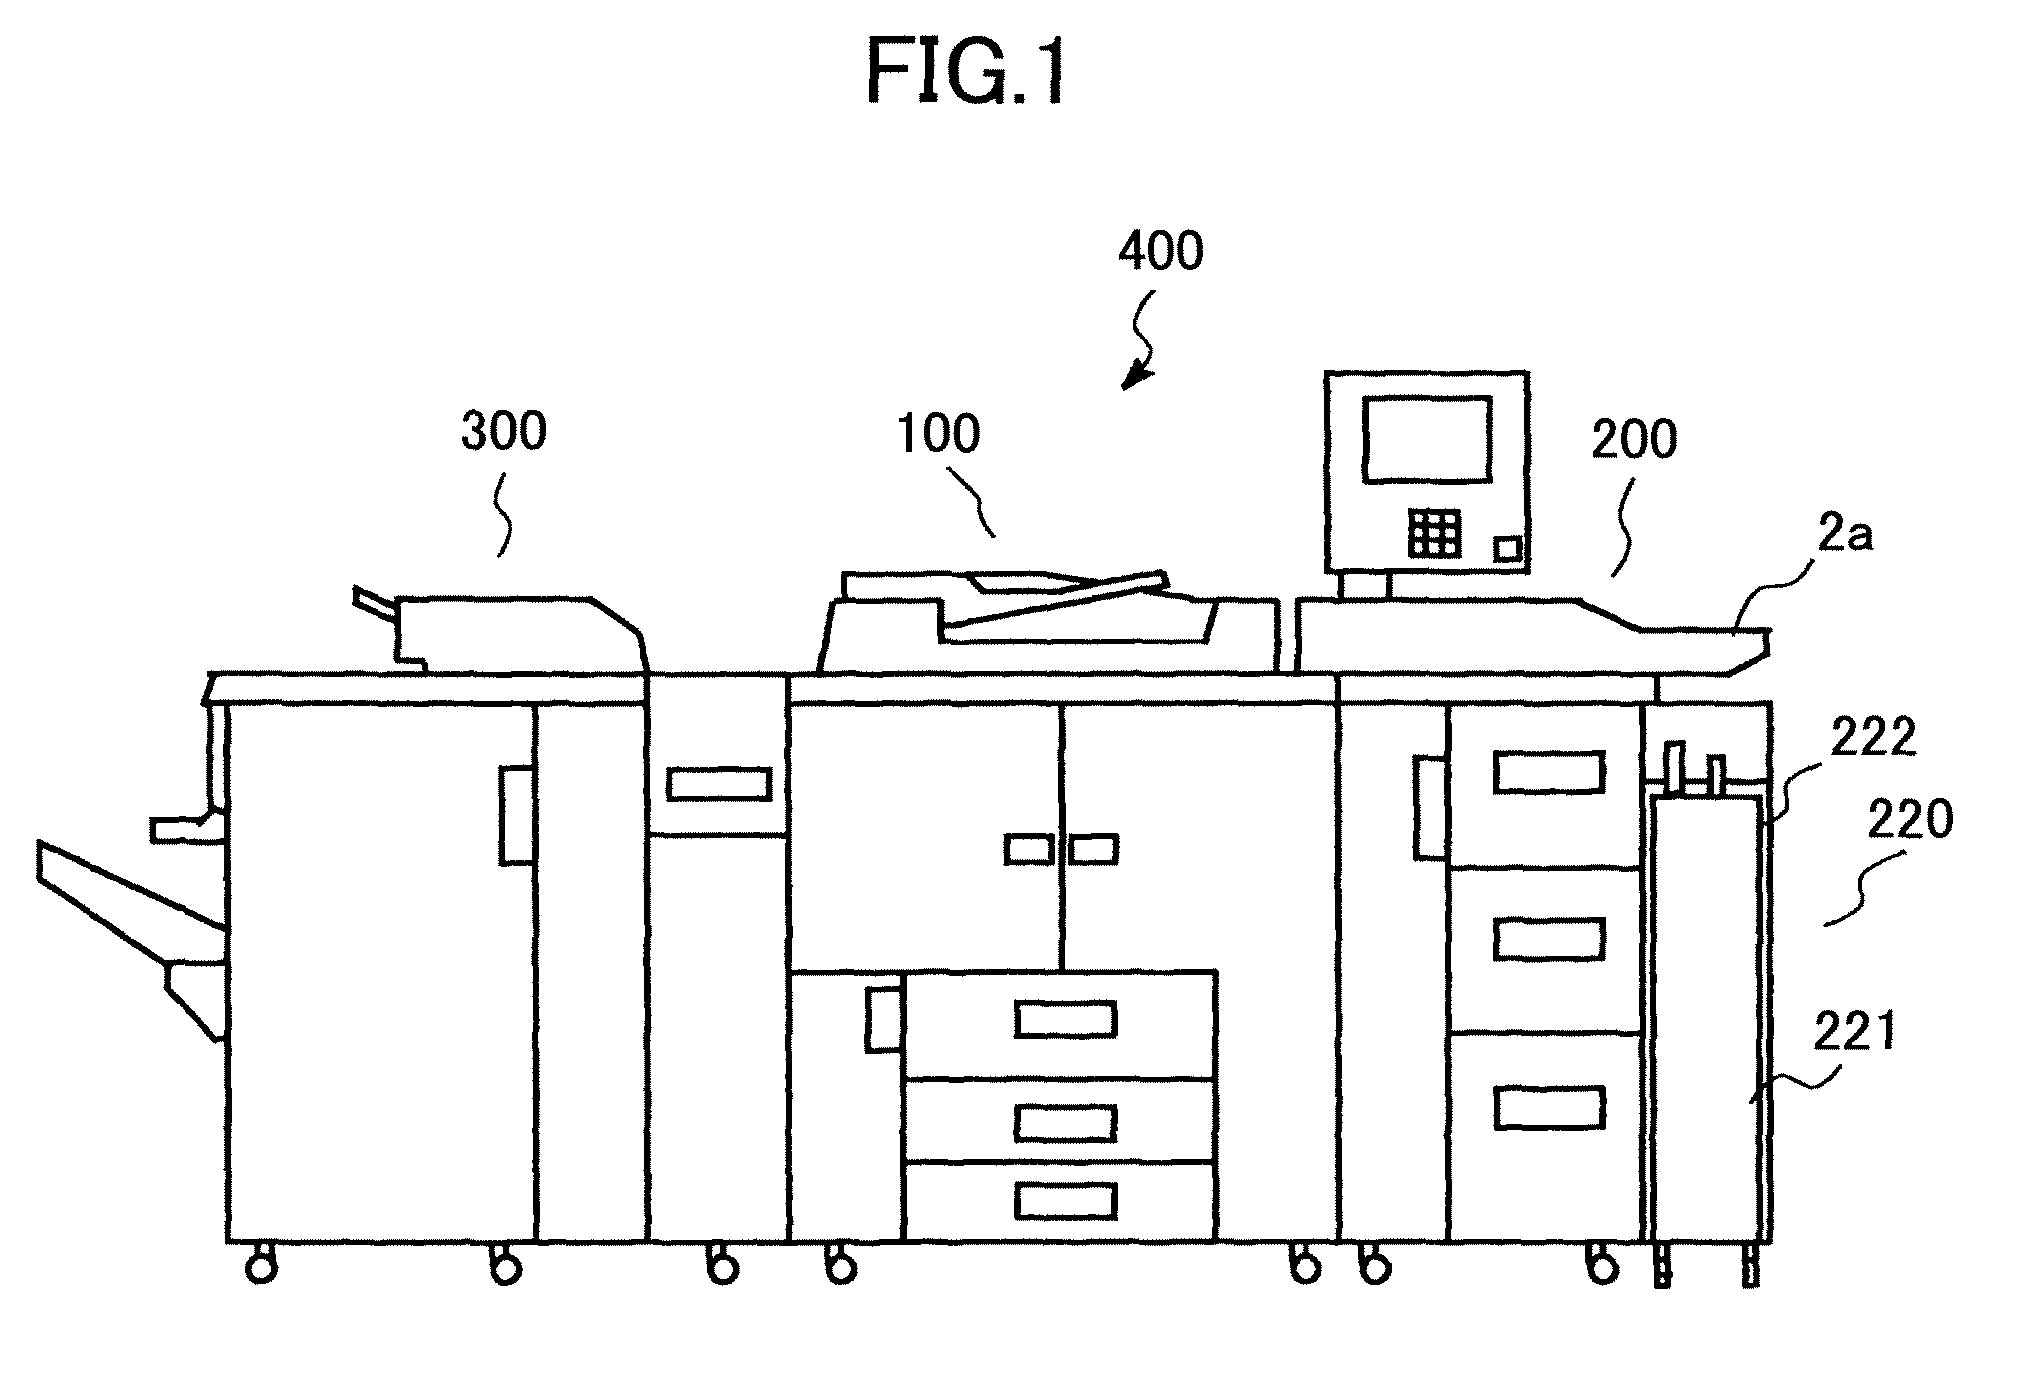 Image forming device, powder supply device, and powder storing unit including a gas supplying unit